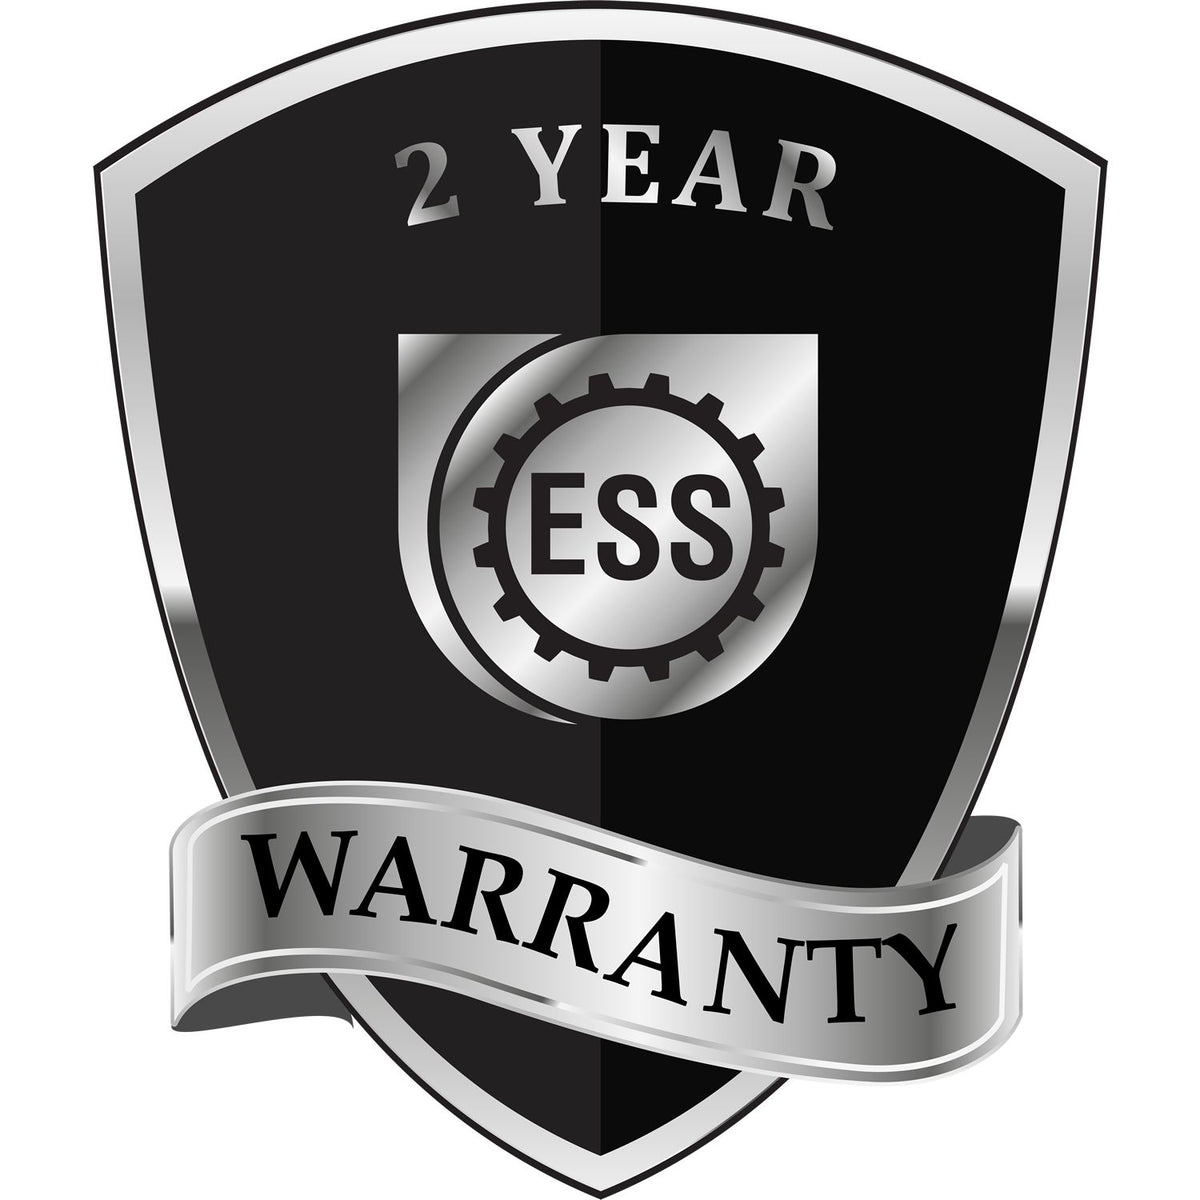 A badge or emblem showing a warranty icon for the Heavy Duty Cast Iron Minnesota Architect Embosser